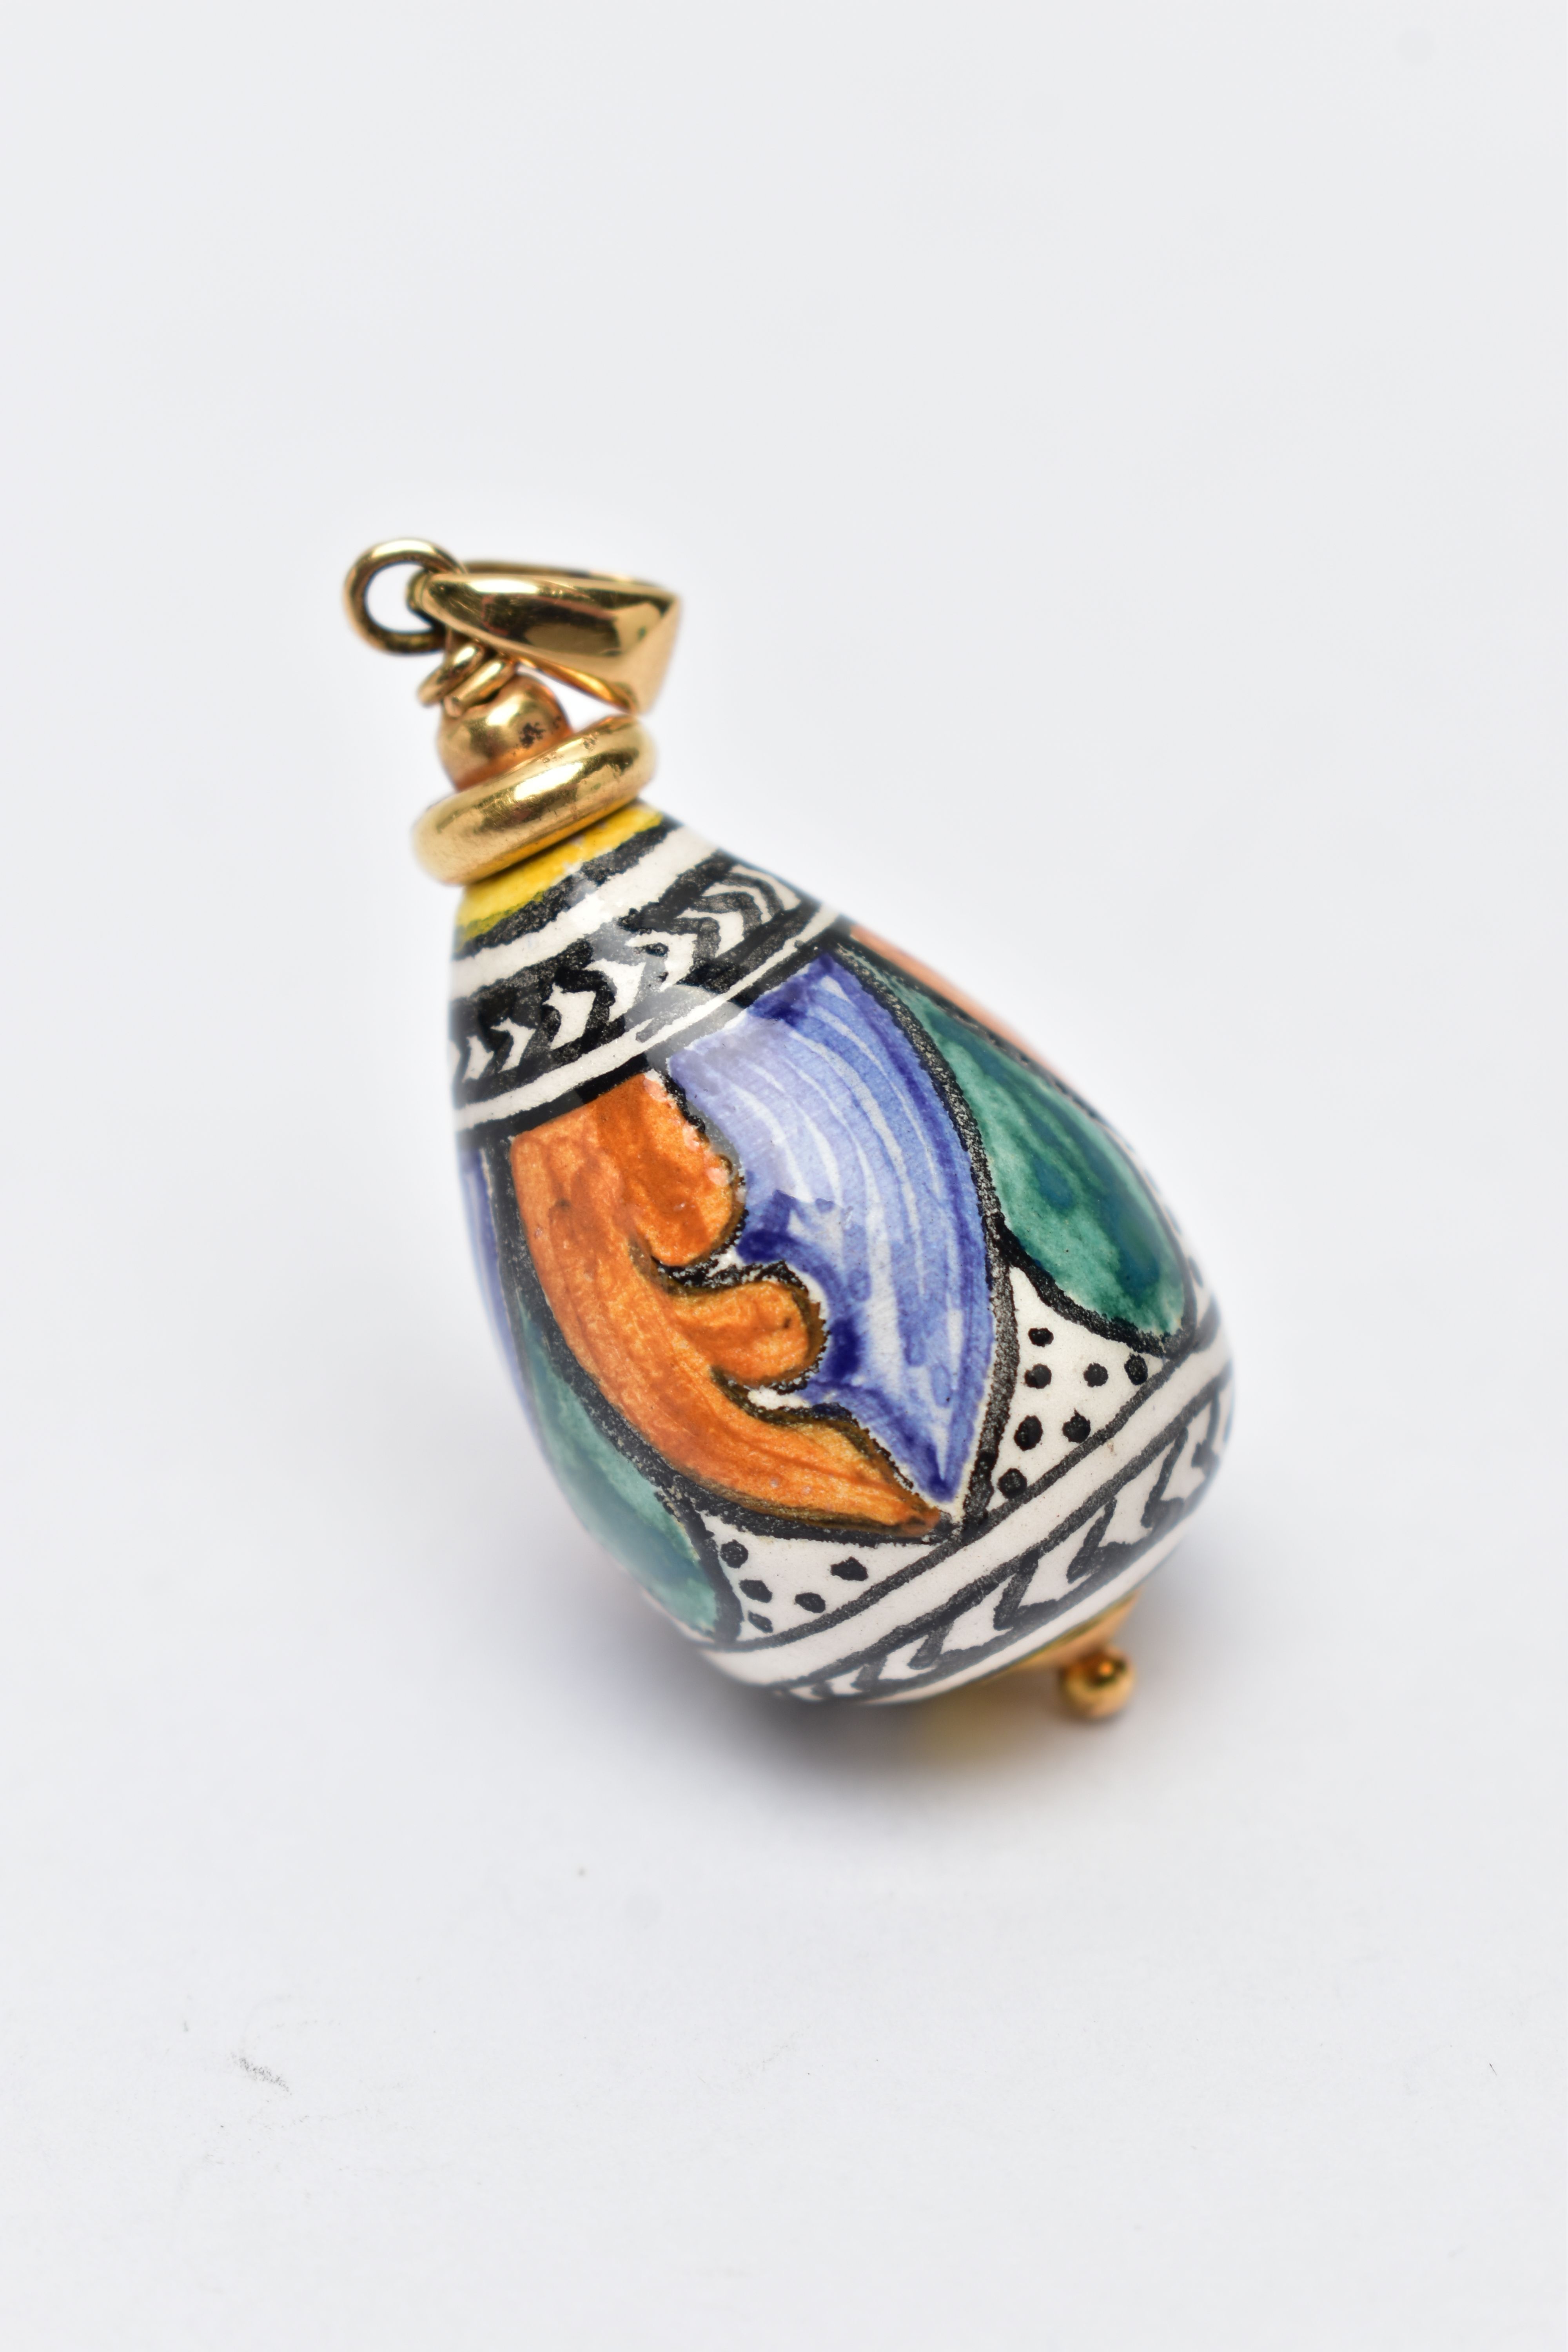 A YELLOW METAL AND CERAMIC PENDANT, polychrome ceramic tear drop pendant detailed with green, - Image 4 of 4